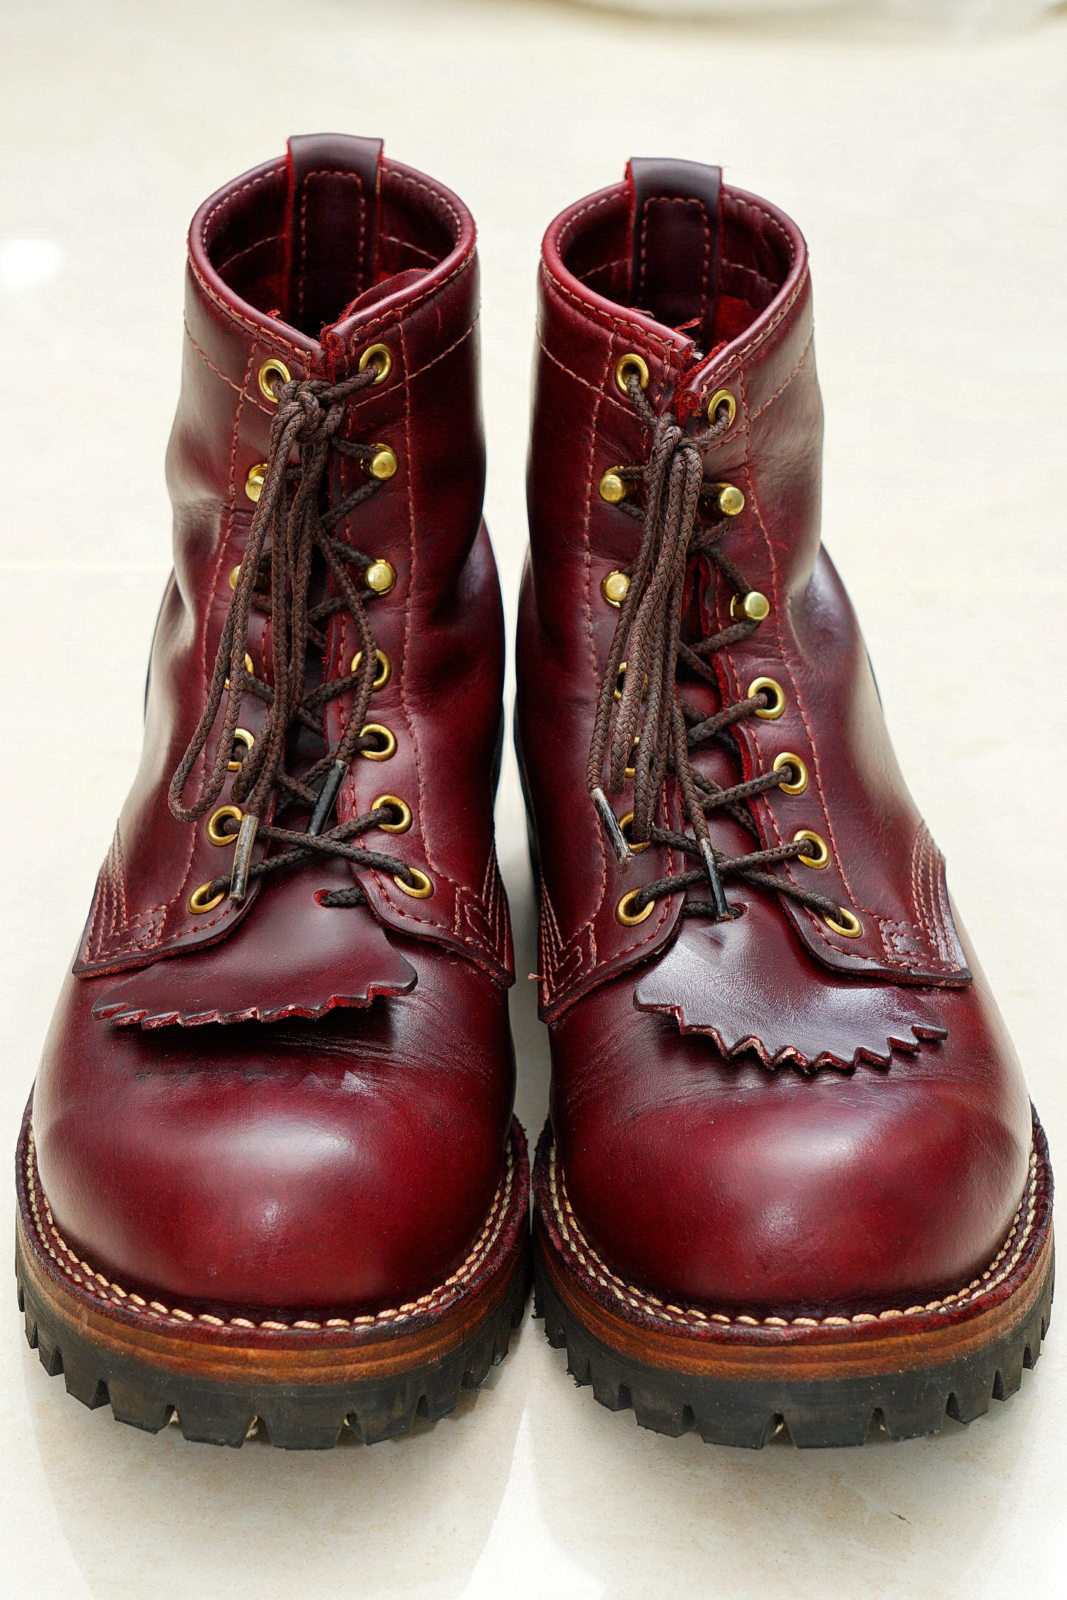 WESCO Boots Jobmaster Burgundy 酒紅七吋皮靴，正面